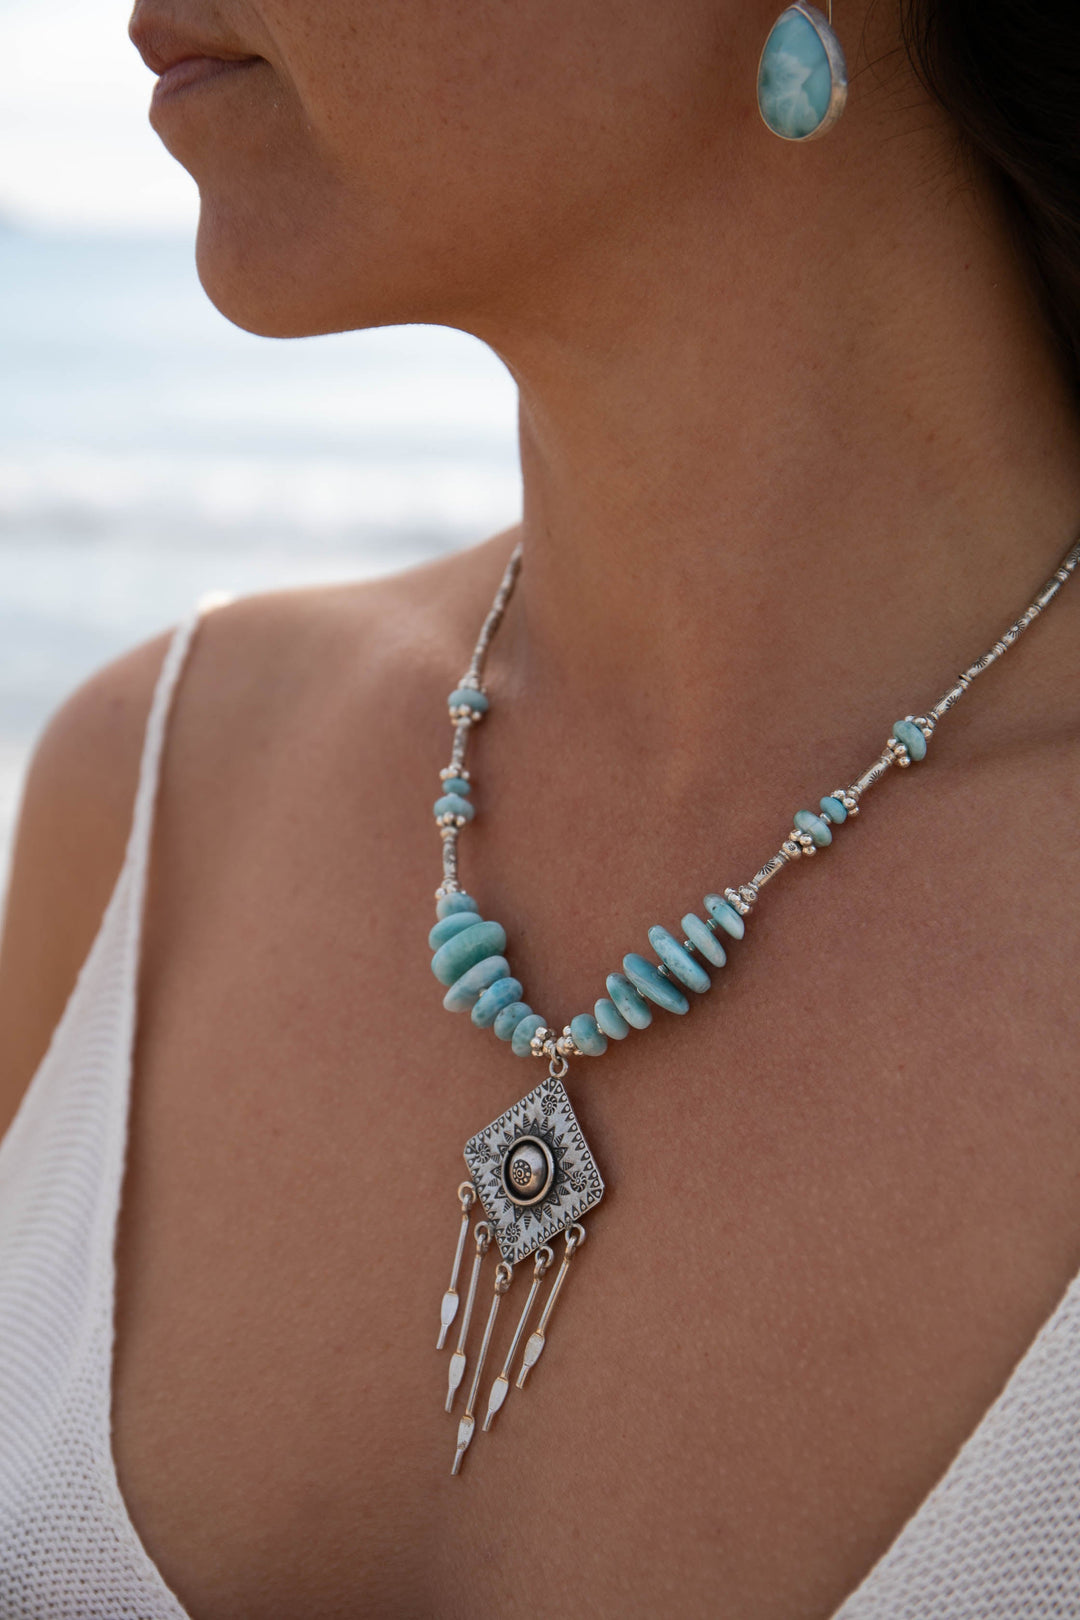 Reserved for Senta ***Larimar Necklace with Tribal Thai Hill Tribe Silver Kite Pendant and Beads